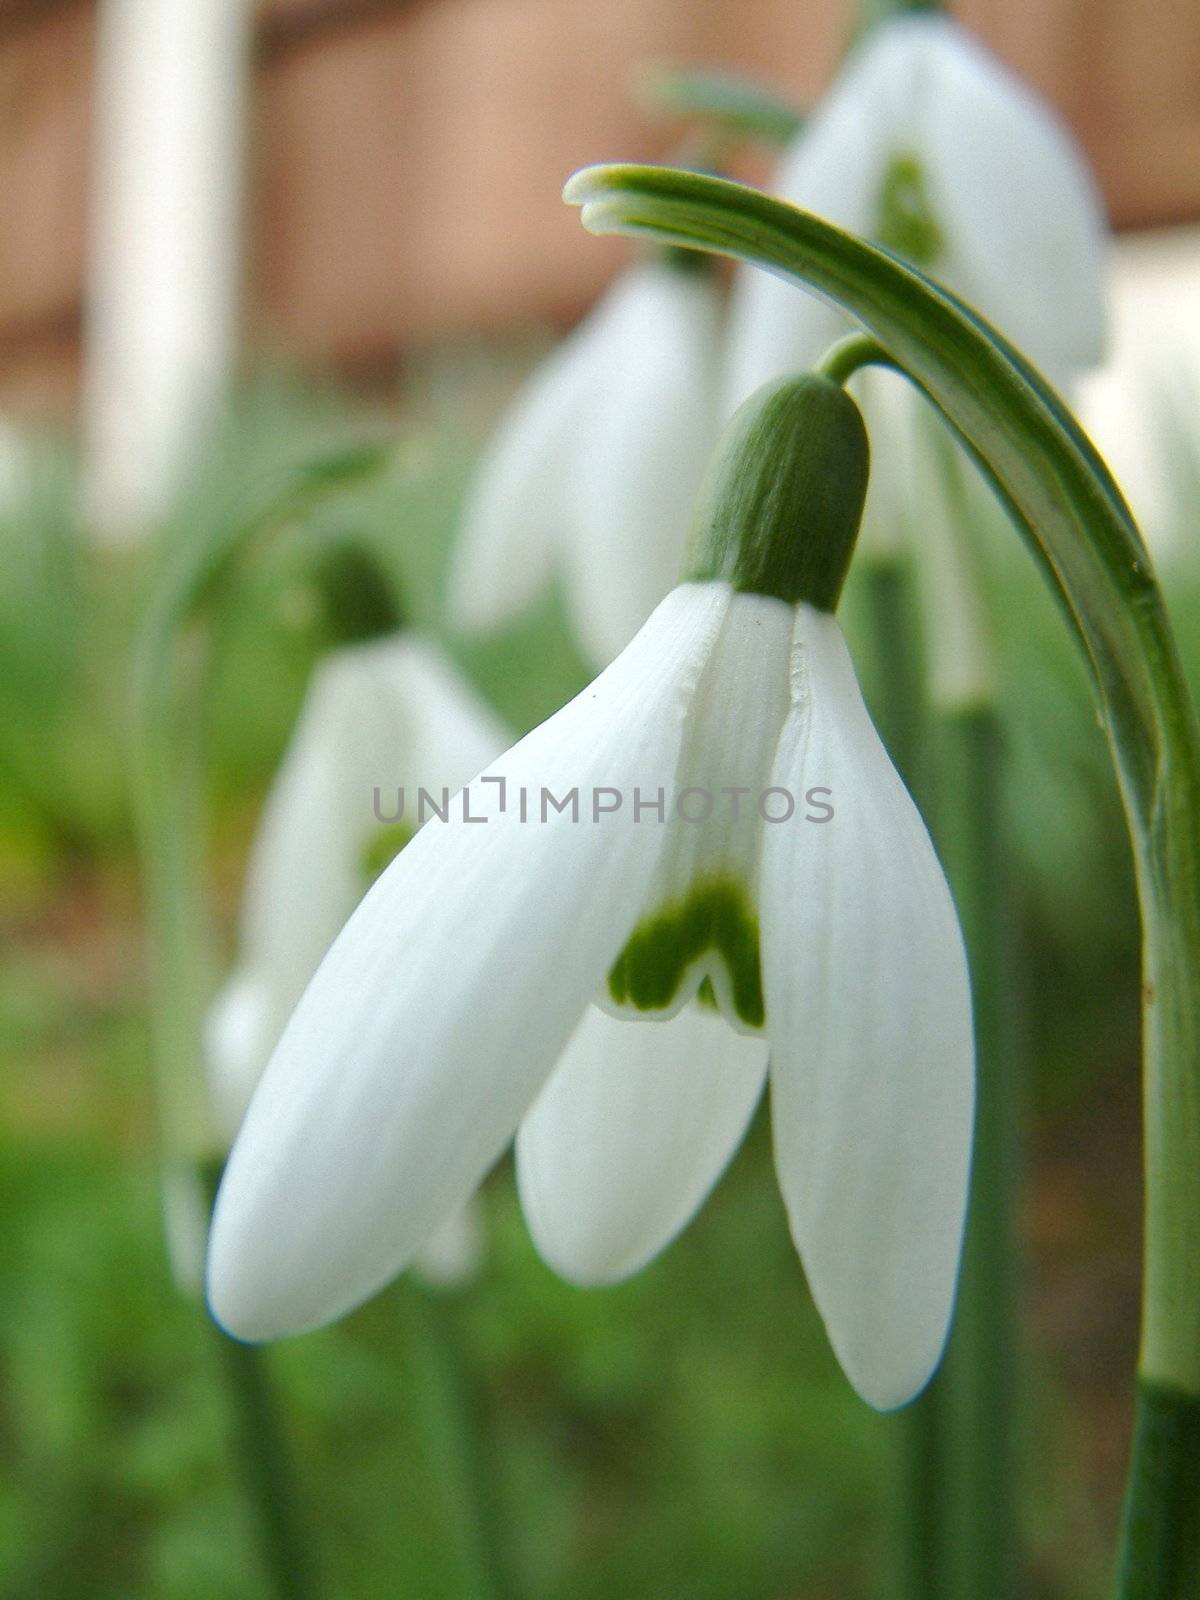 snowdrops by leafy